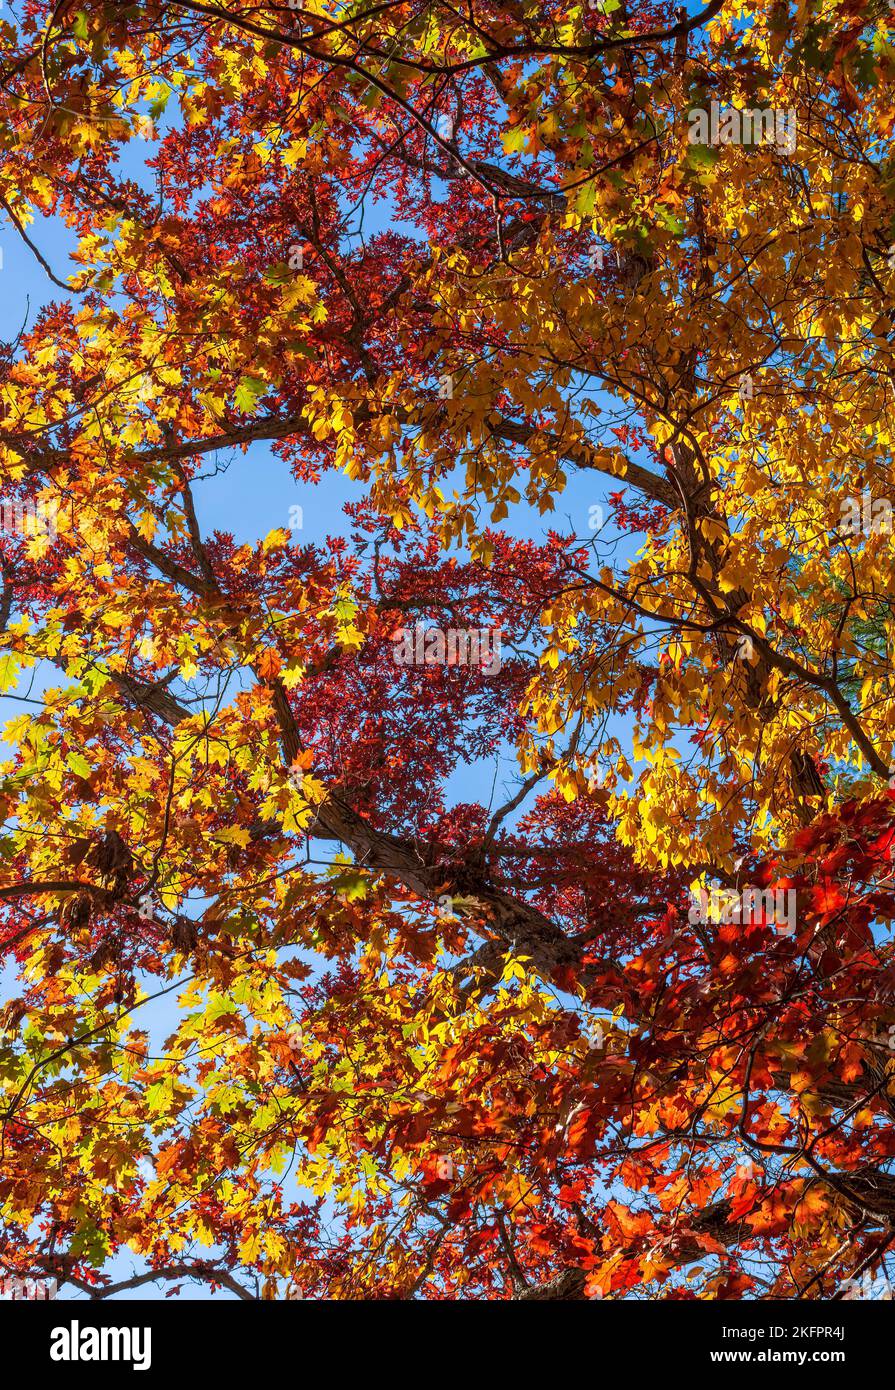 Tree canopies: scarlet oak, white oak and butternut. Fall foliage in New England. Leaves in golden and red shades. Charles River Peninsula, Needham MA Stock Photo